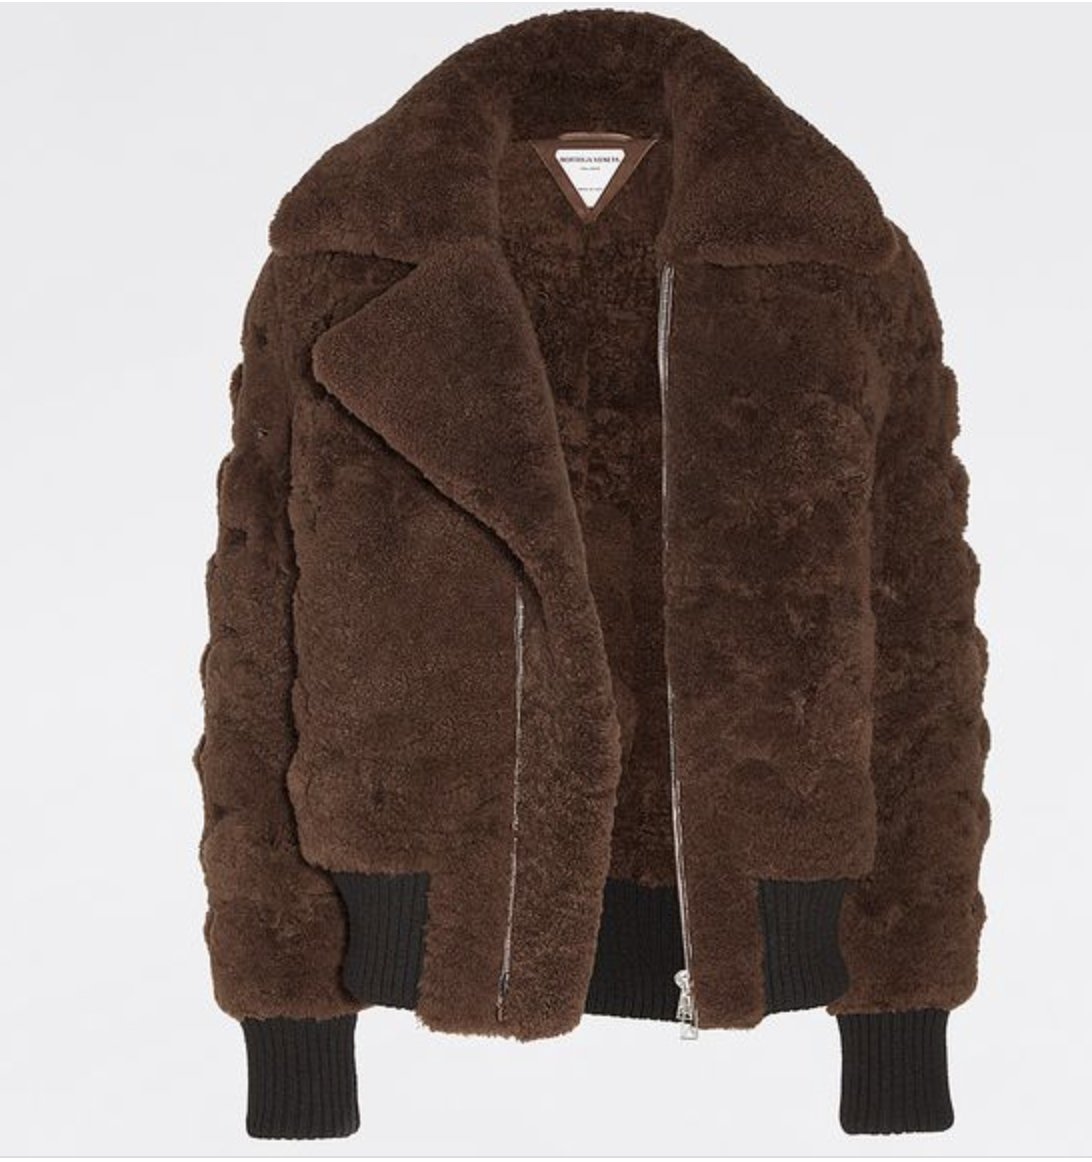 dead animal parkas for that sexc furry feeling (the cheapest is $8.5k, the others are 50% more than that